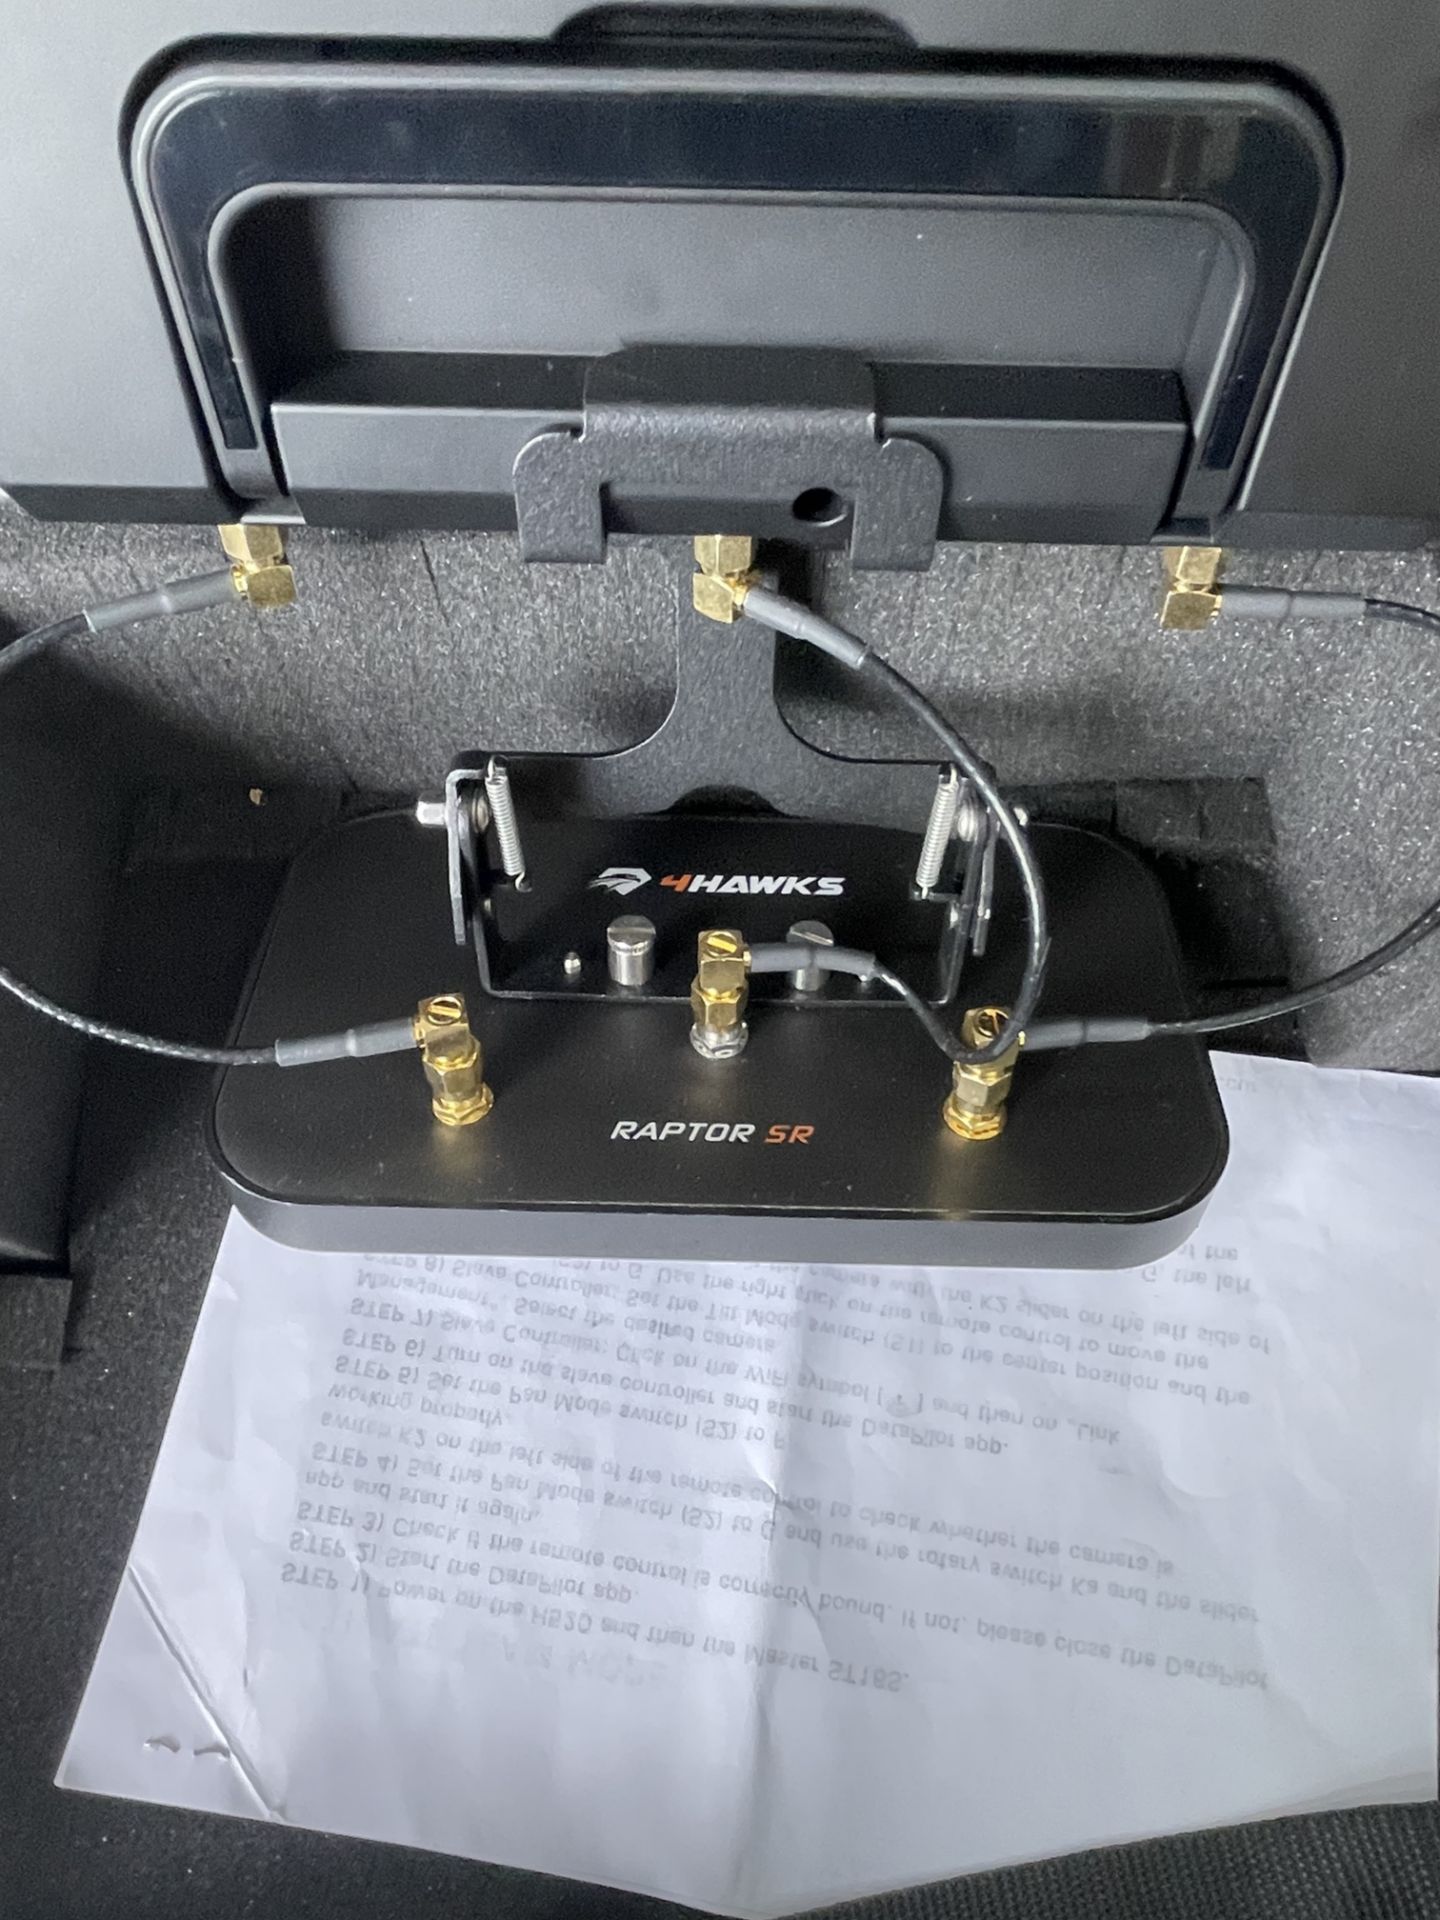 Yuneec H520 drone YOM 2019 and accessories as listed - Image 21 of 39